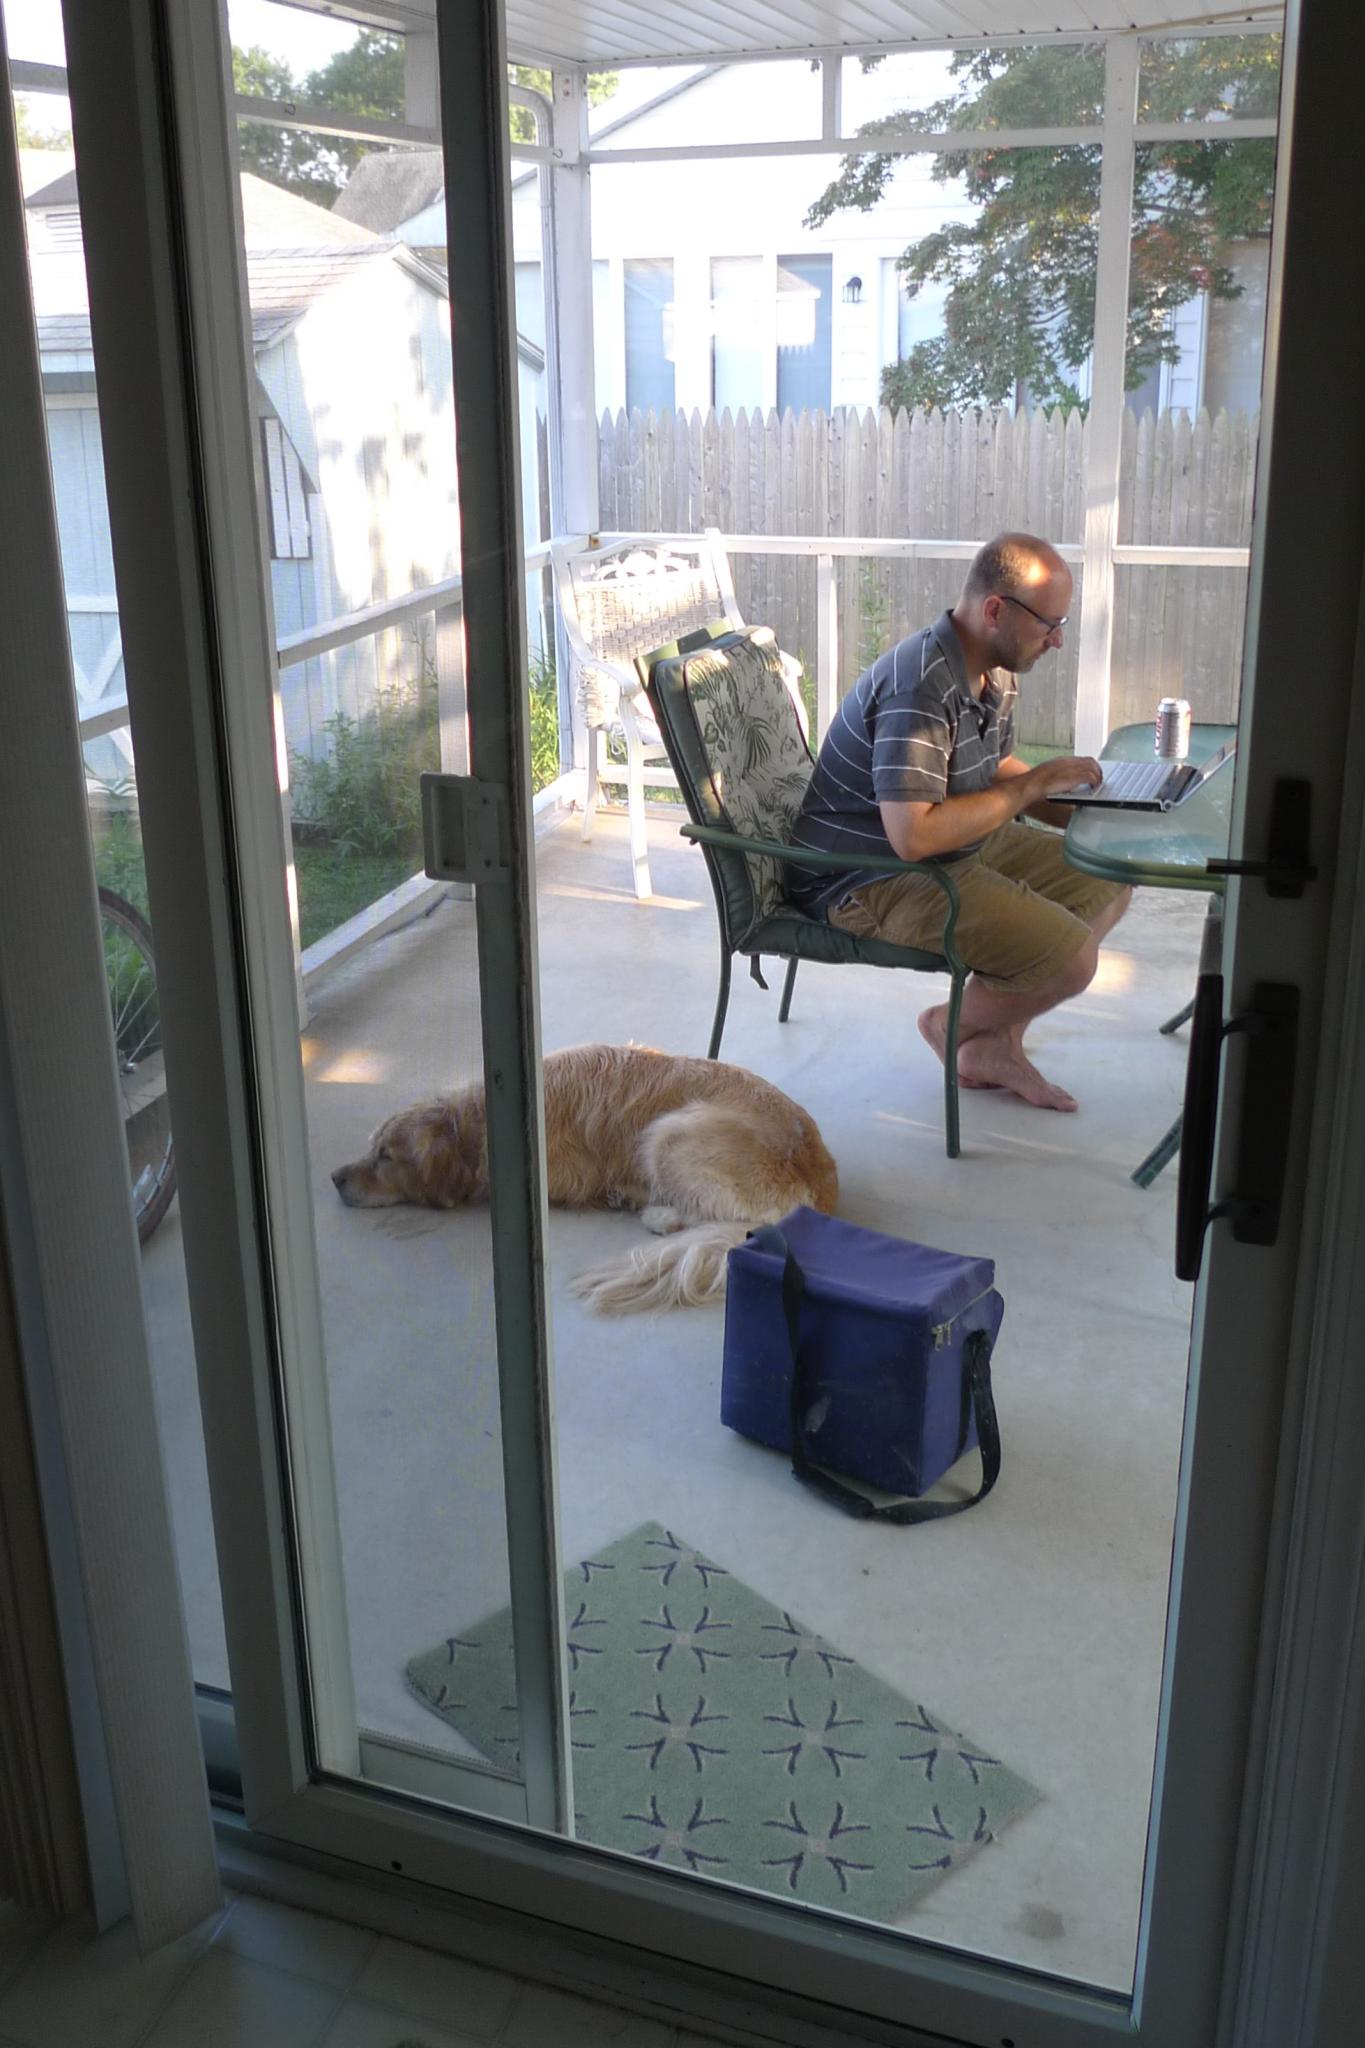 Man working on a computer on the porch with dog at his feet | Photo credit: jsmjr  -  Foter  -  CC BY-SA